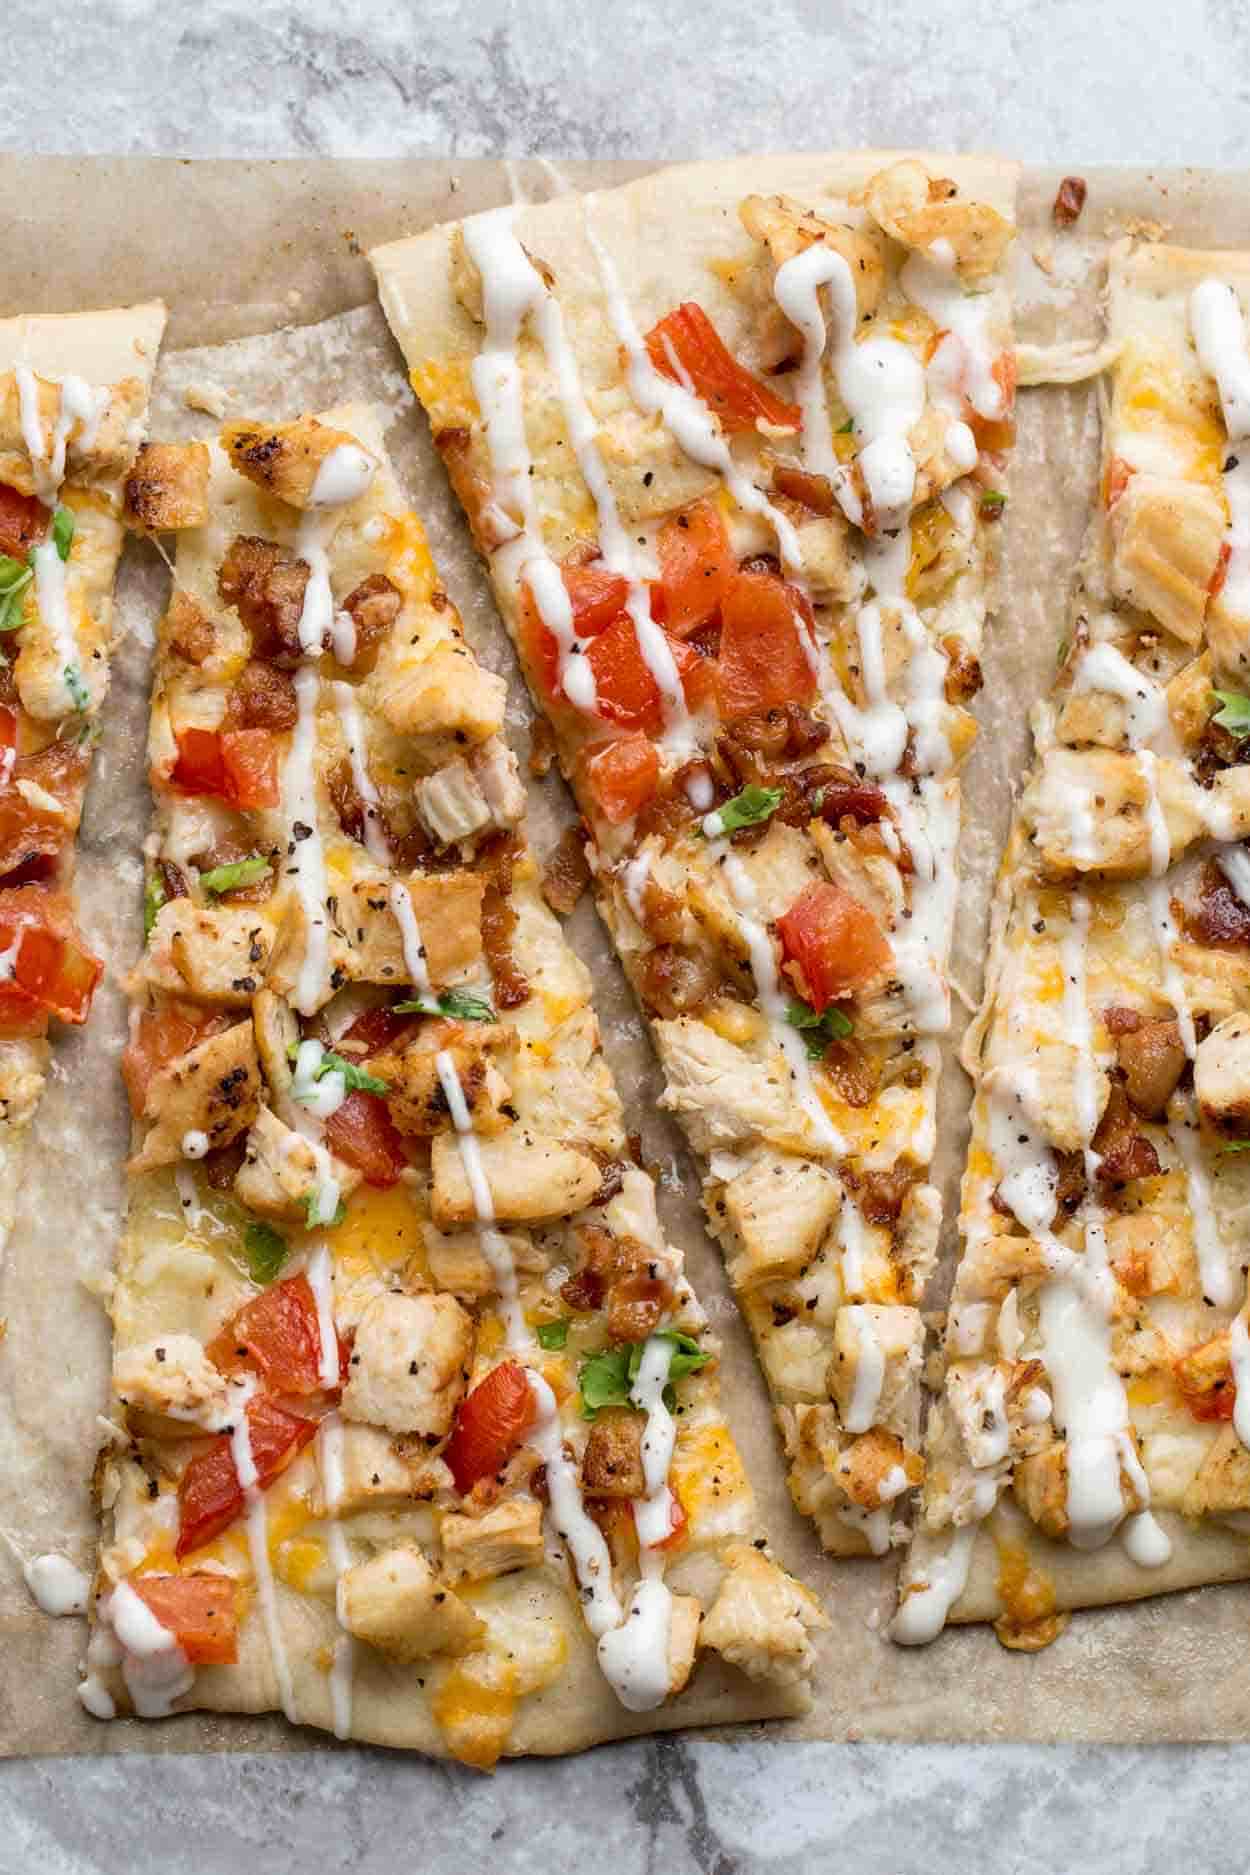 Thin and crispy flatbread crust topped with cheeses, chicken, bacon, avocado and drizzled with Ranch.